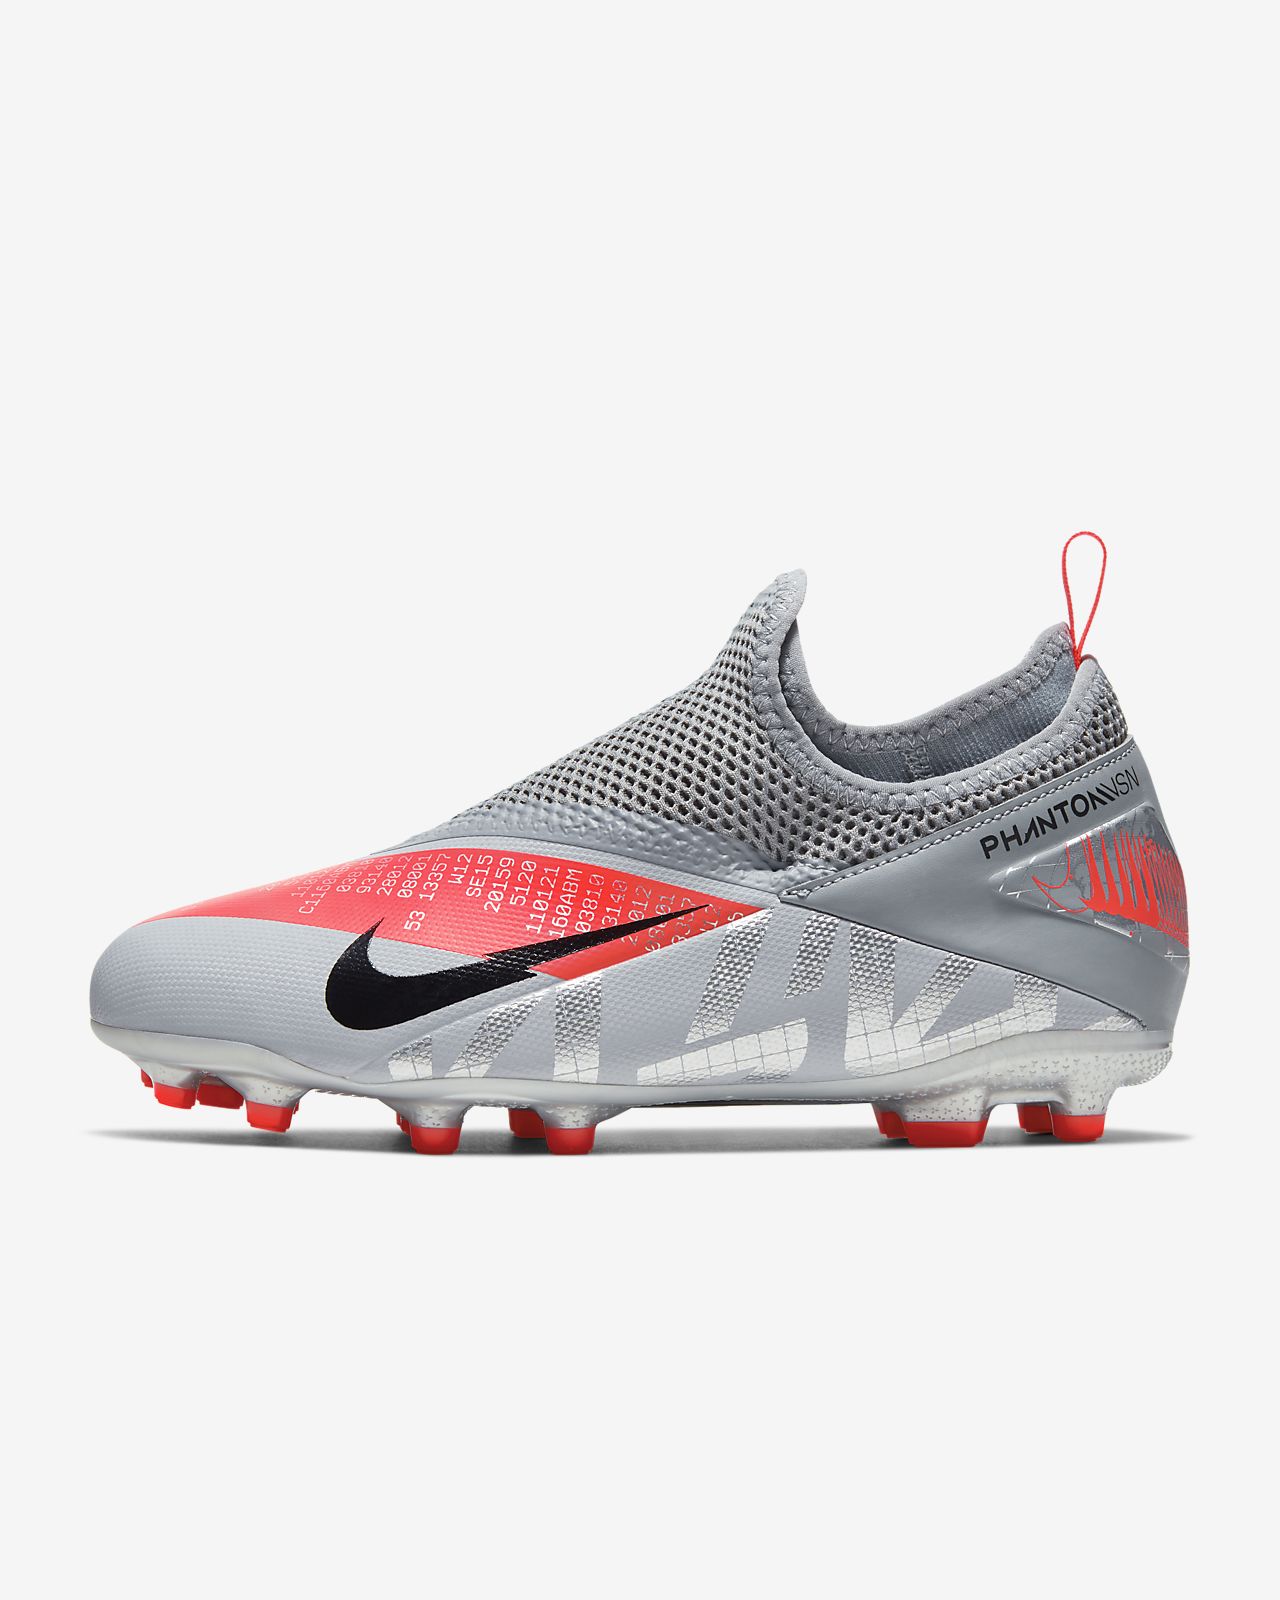 THE BEST $ 80 BOOTS EVER NIKE PHANTOM VISION